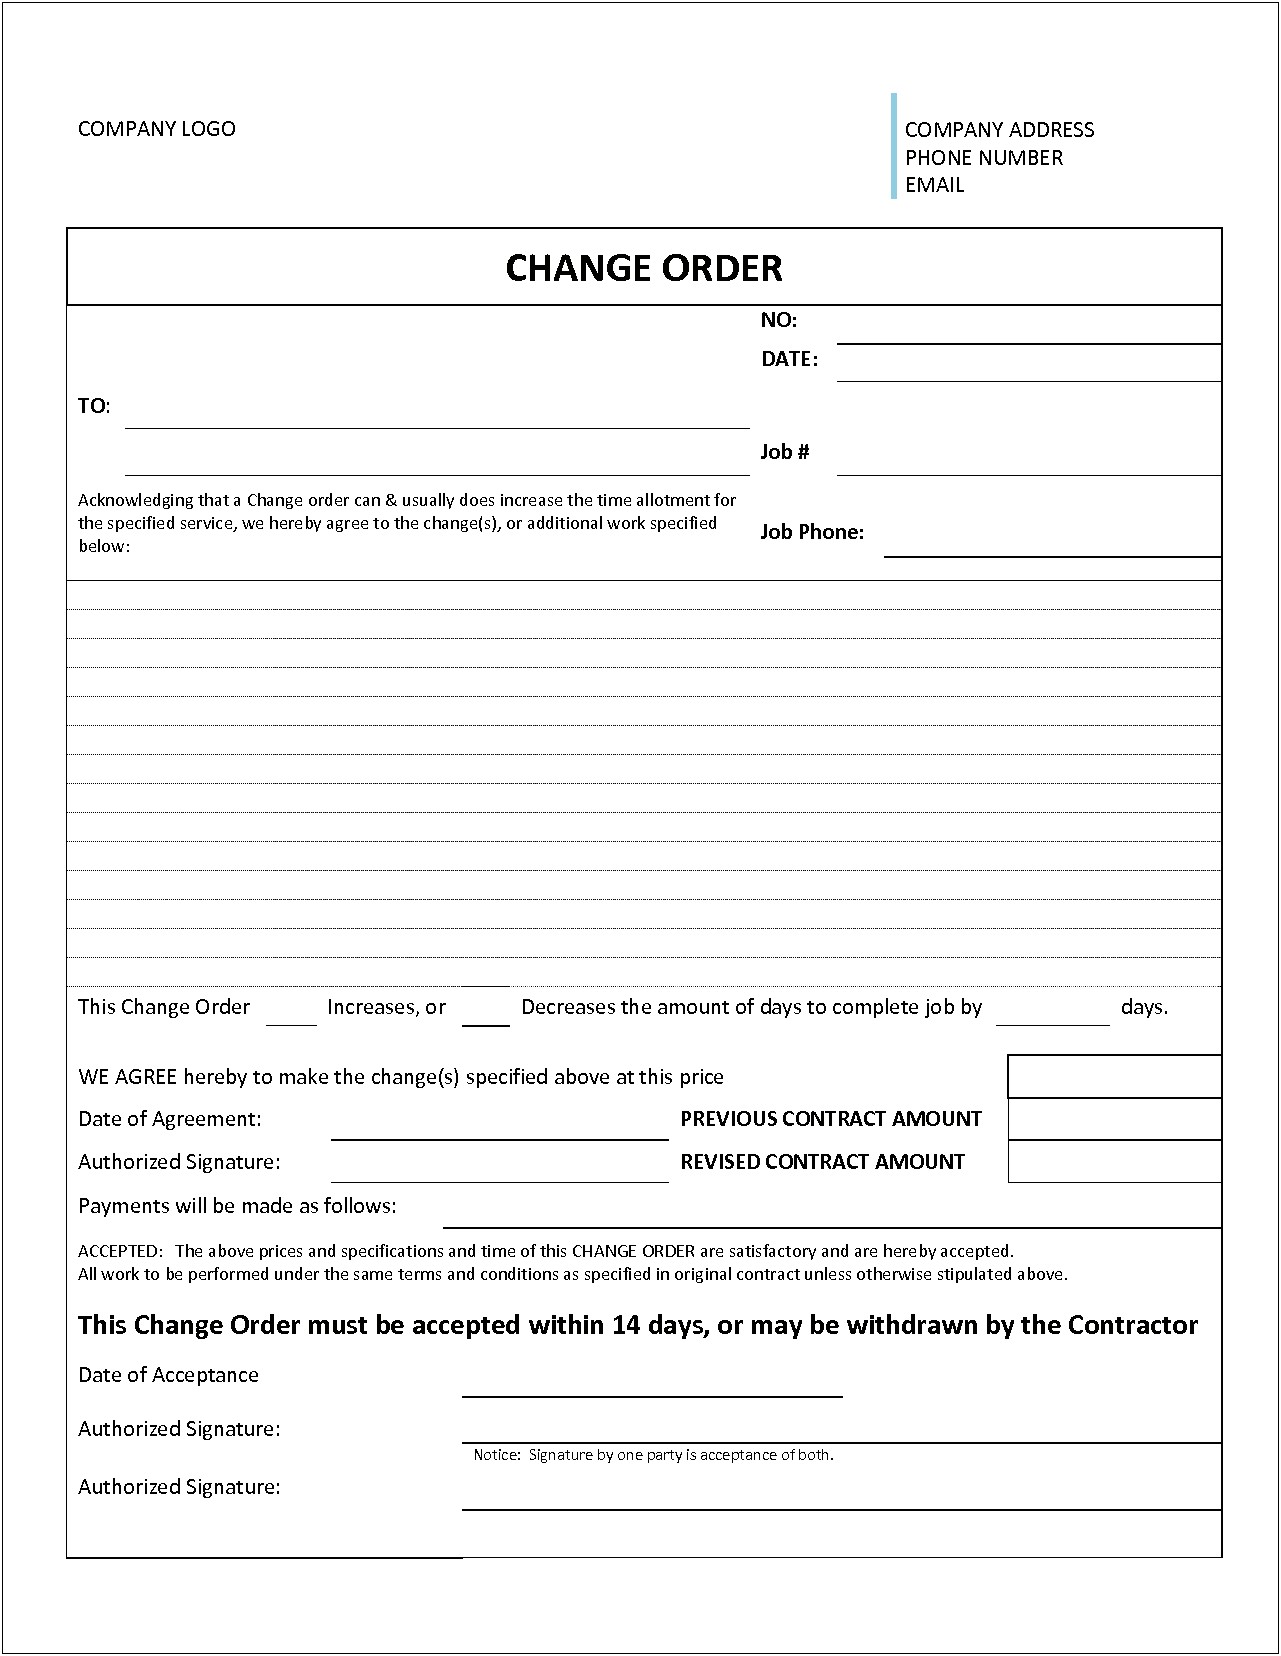 Change Order Form Word Template Free